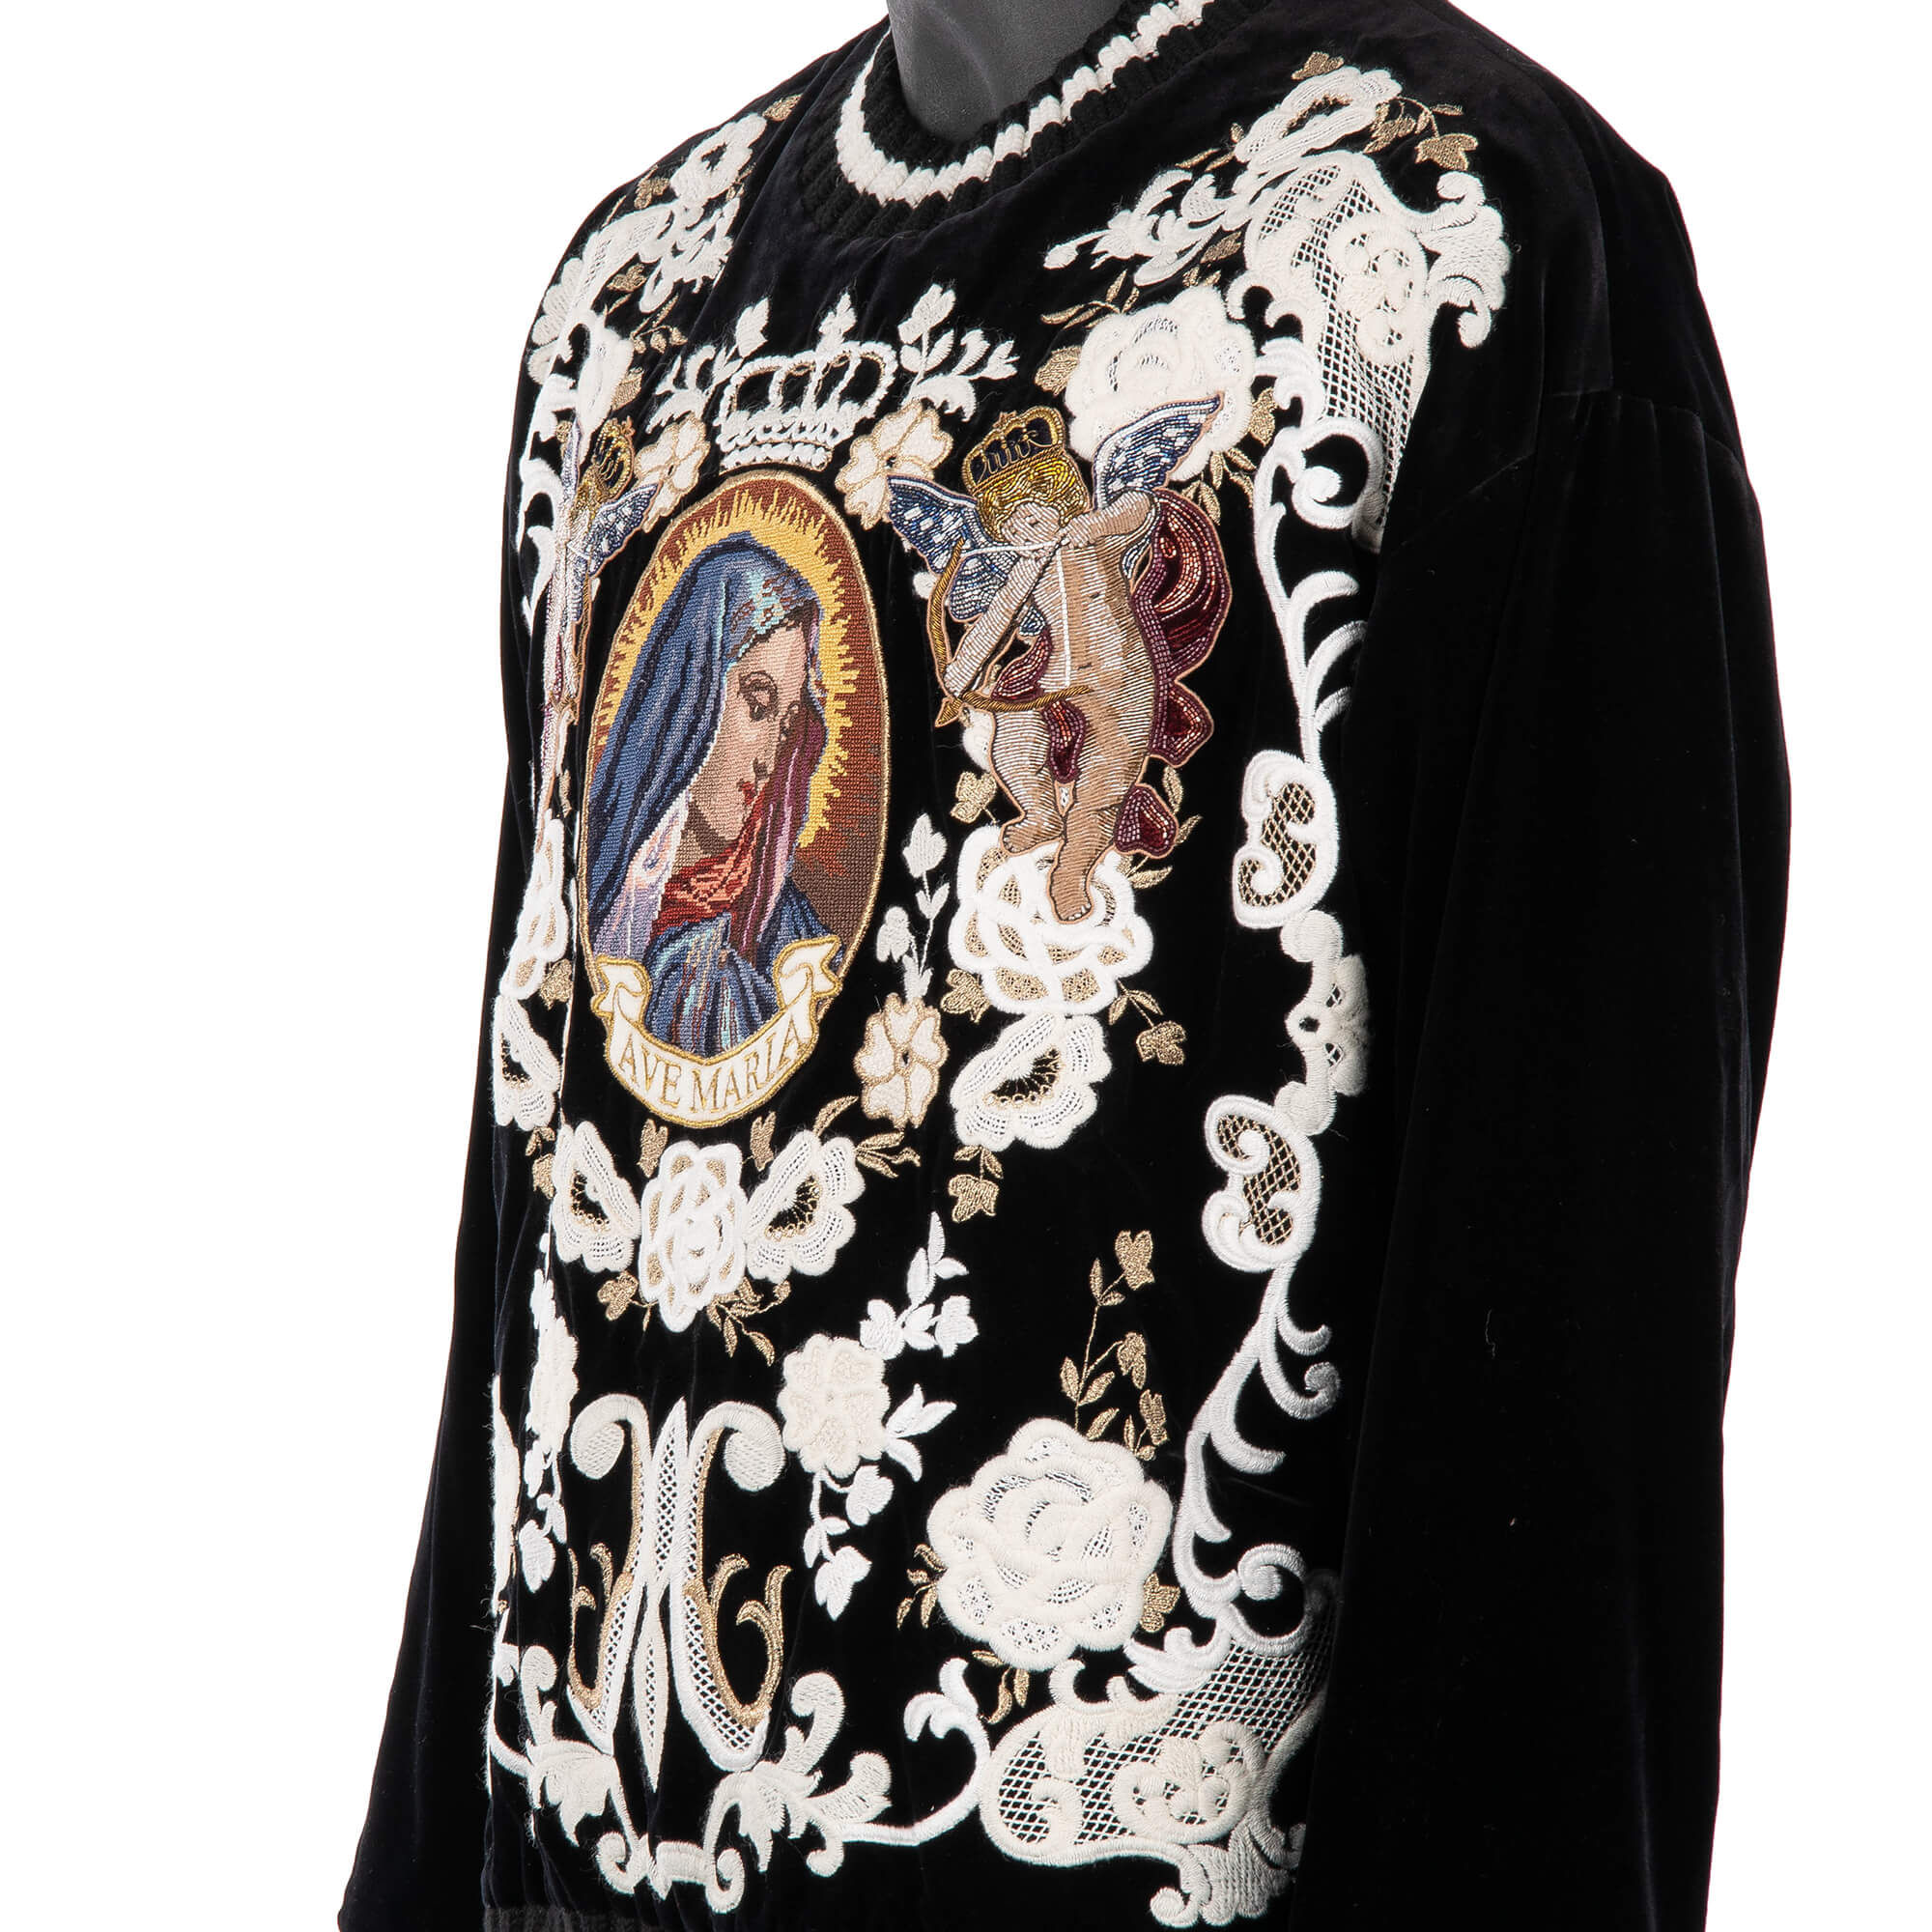 Velvet-Sweater-with-Angels-and-Santa-Maria-Embroidery-Black-White-6.jpg